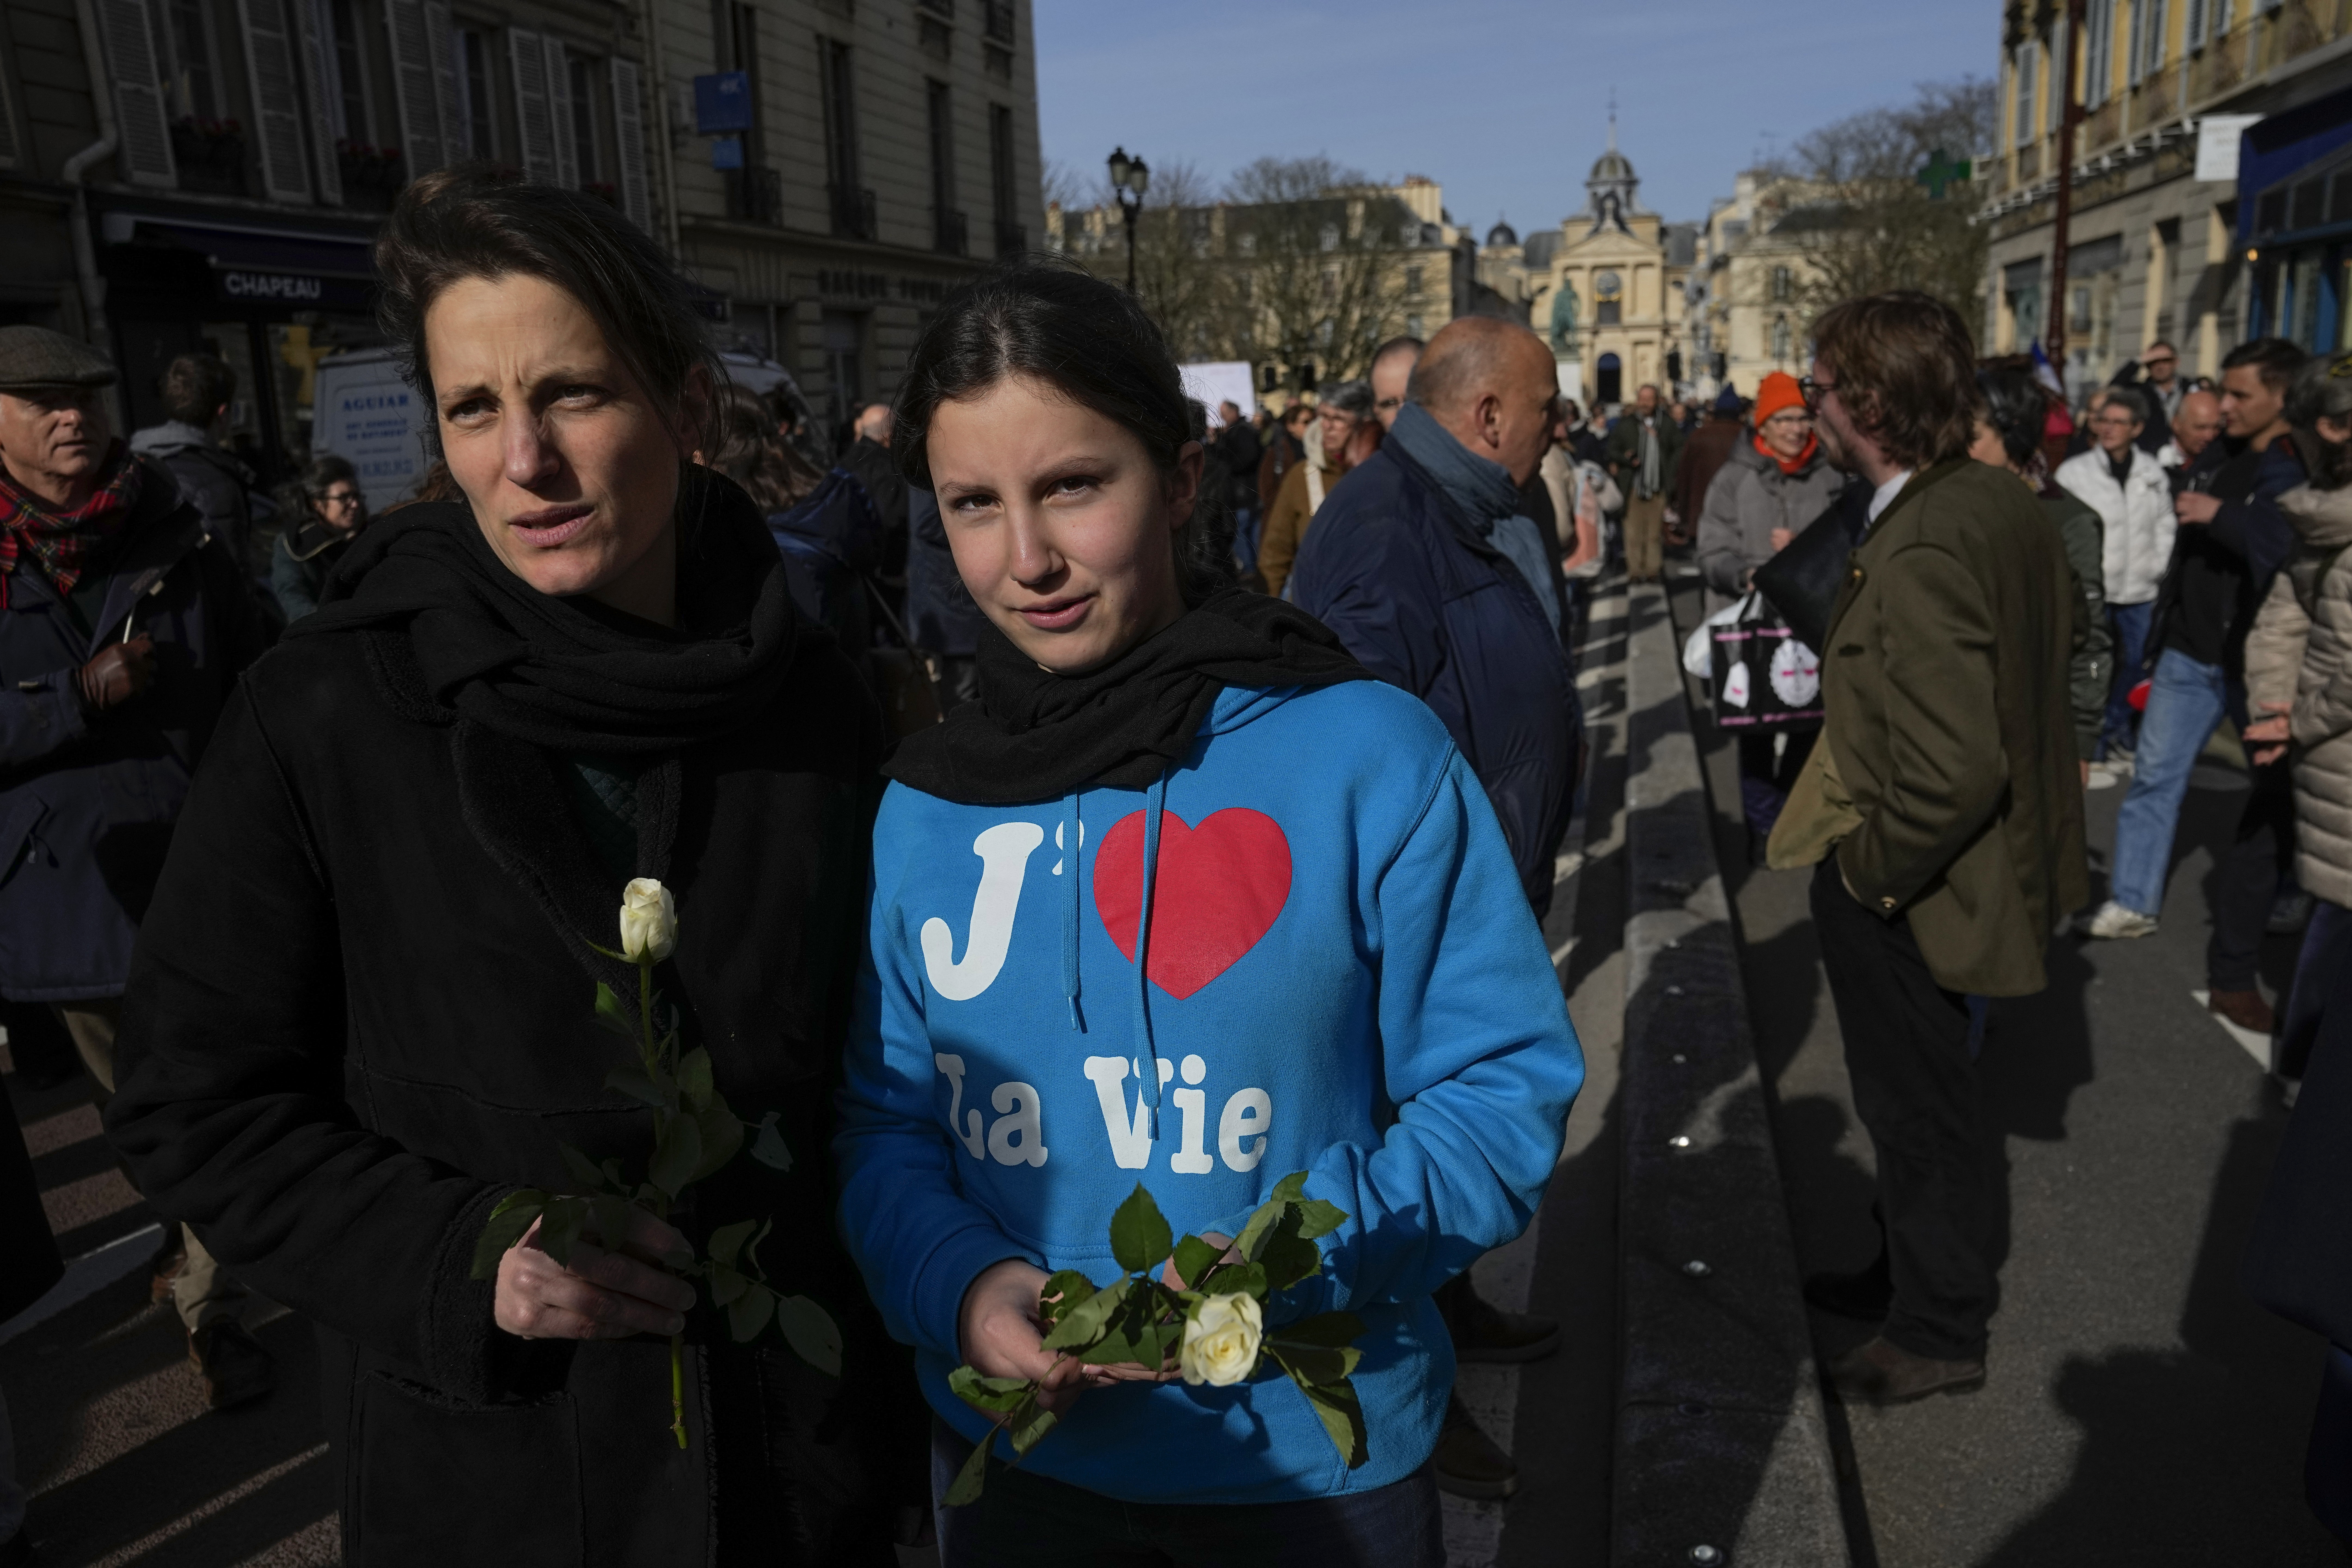 France became the only country to guarantee the right to abortion